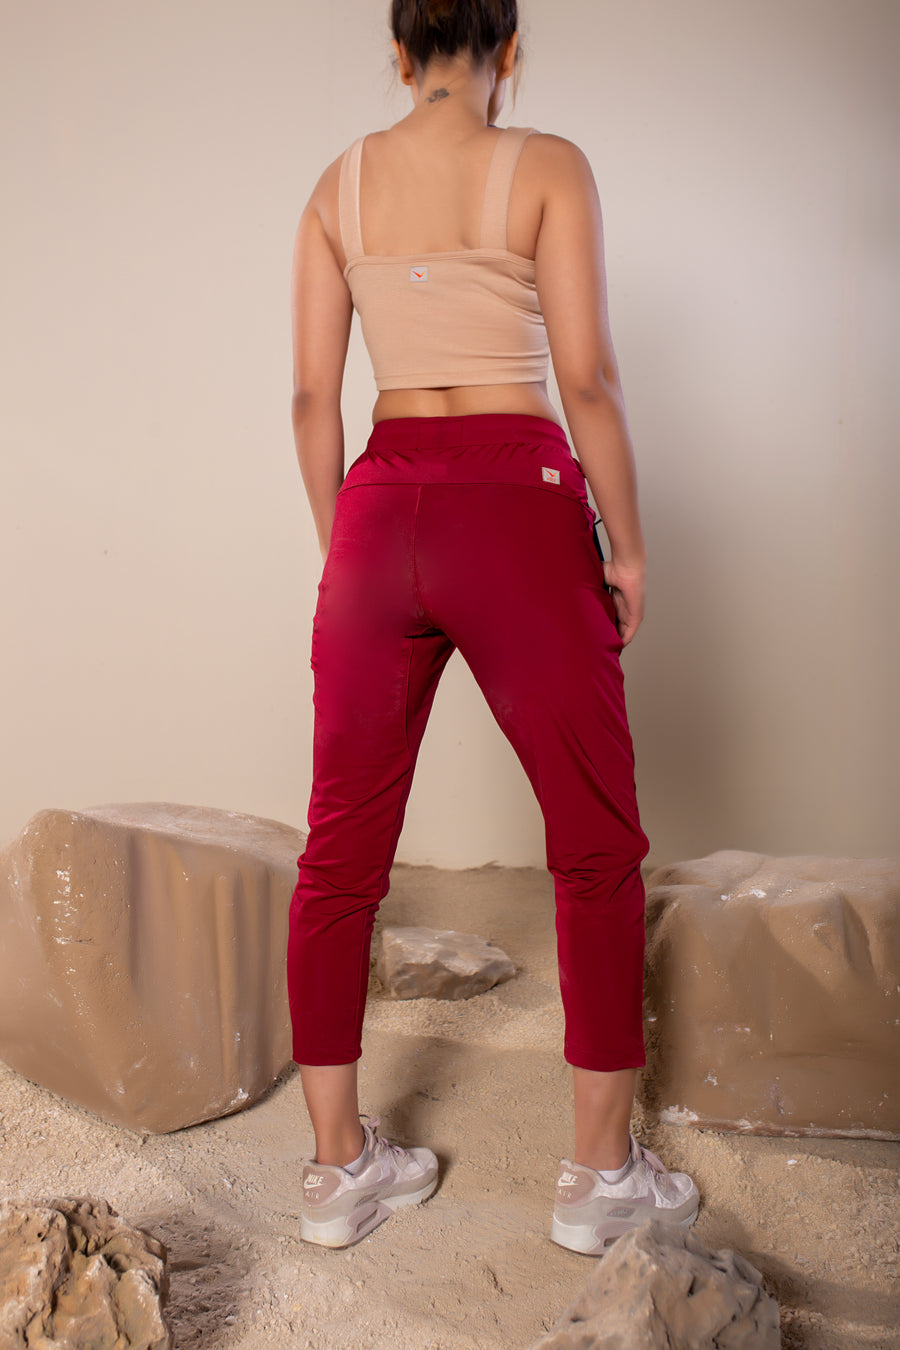 Women's Wanderlust Pant Maroon | VOLO Apparel | These pants are designed to give you wanderlust, an ultralight super durable athletic pant with a five pocket design, a 3 point gusset for all your movements and a high ankle tapered bottom. The revolutional Italian nylon is patented with UPF 50 protection and extreme breathability. The one pant to go everywhere and do everything!